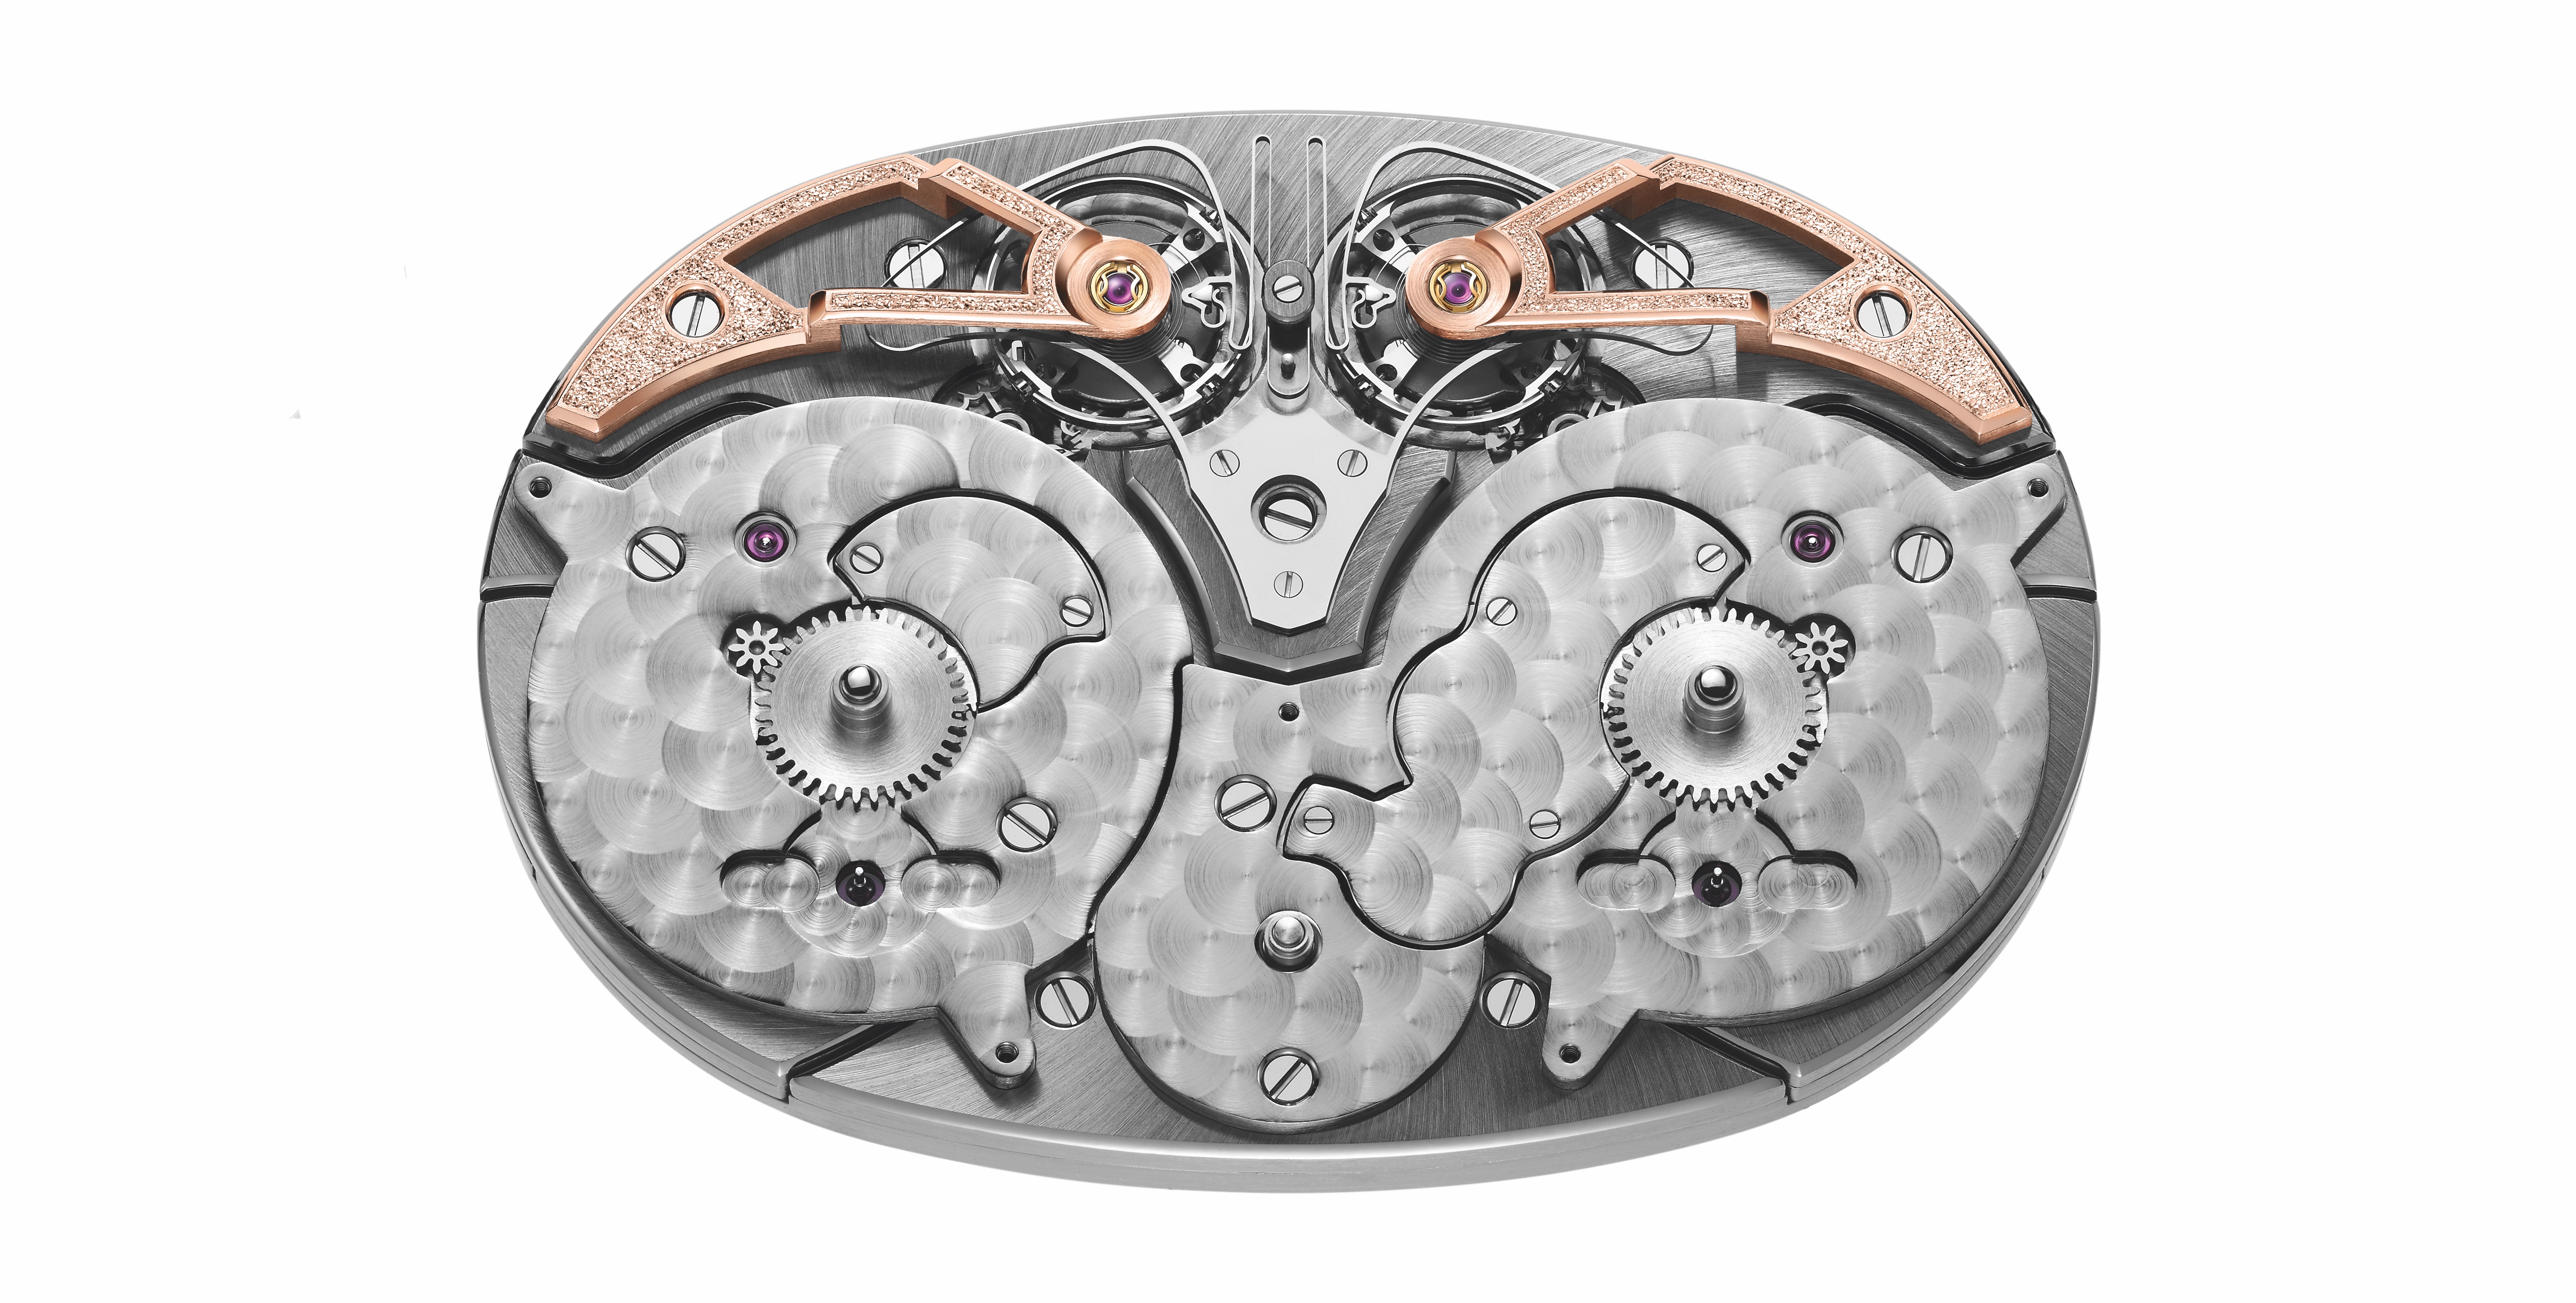 Armin Strom ARF17 movement for the rose gold Dual Time Resonance GMT watch.